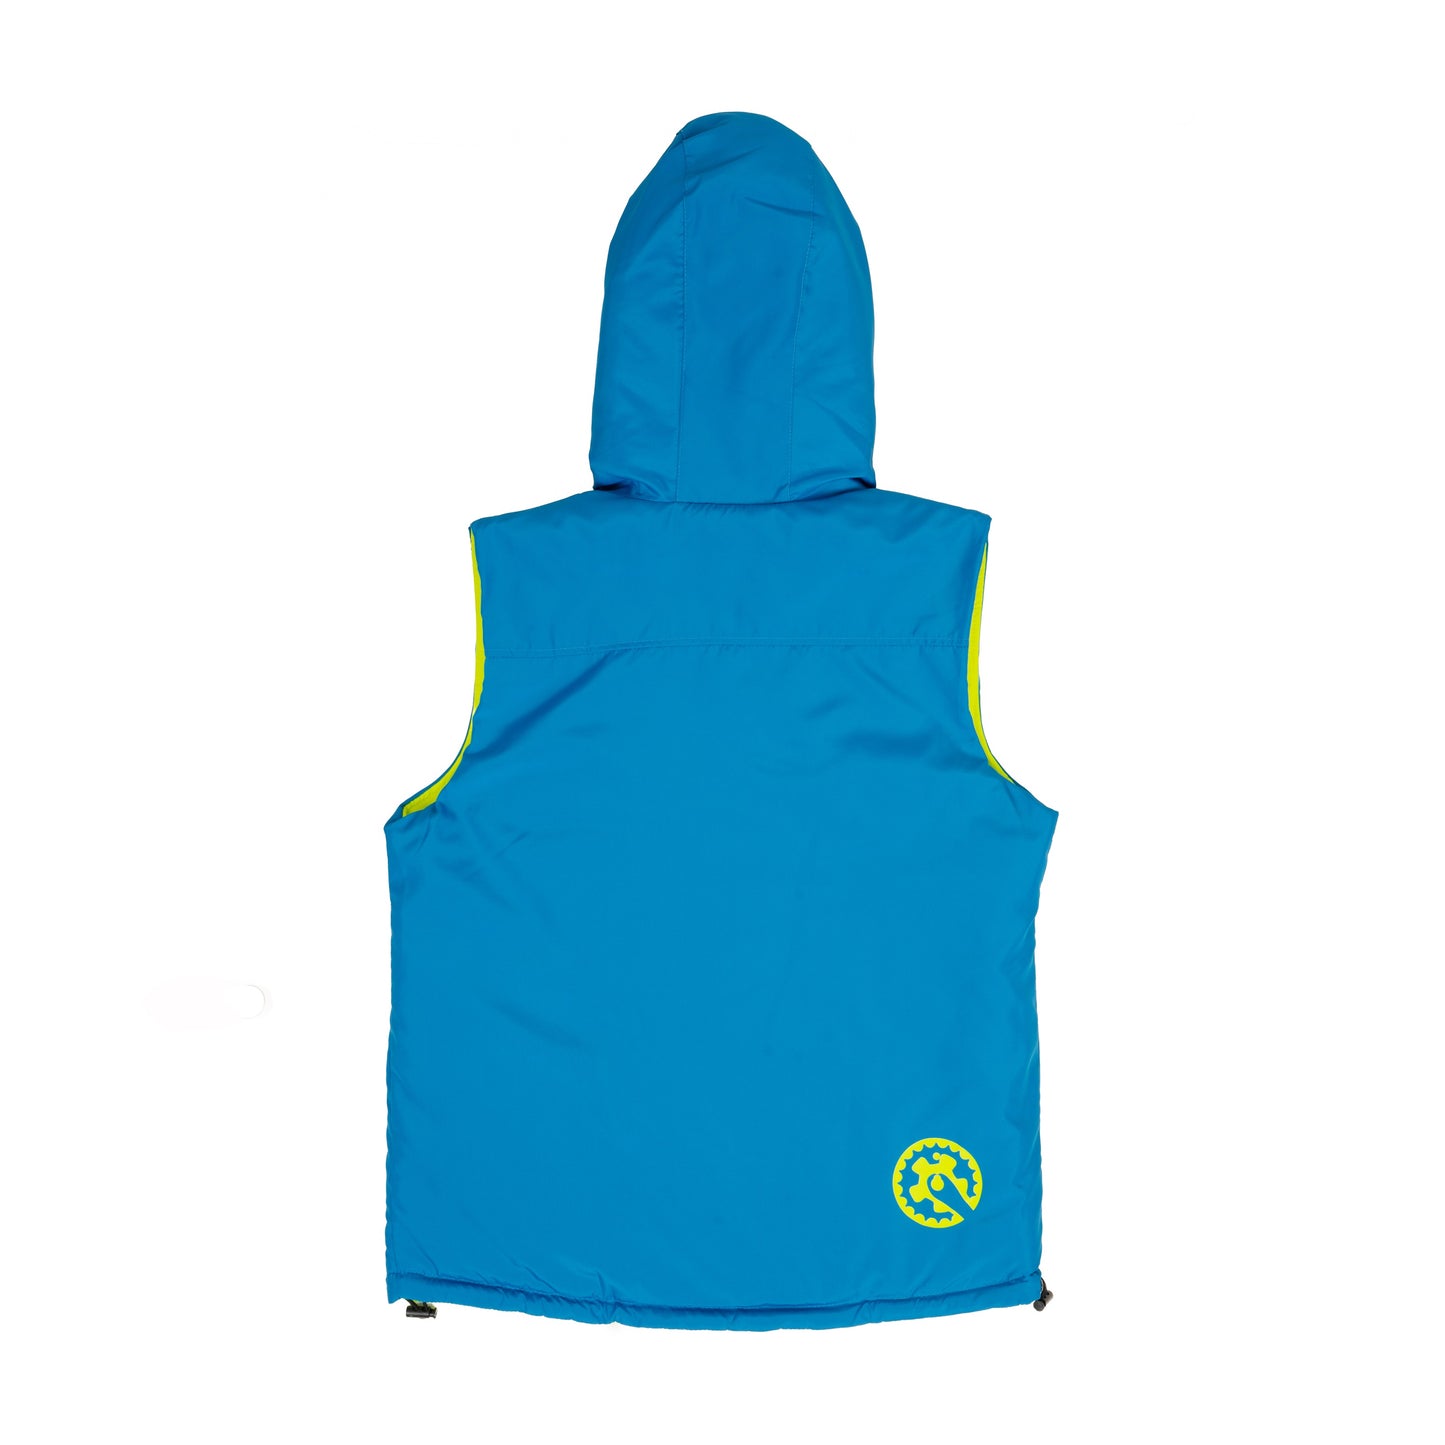 AZA x MAINSEPEDA Vest Reversible Safety First Edition